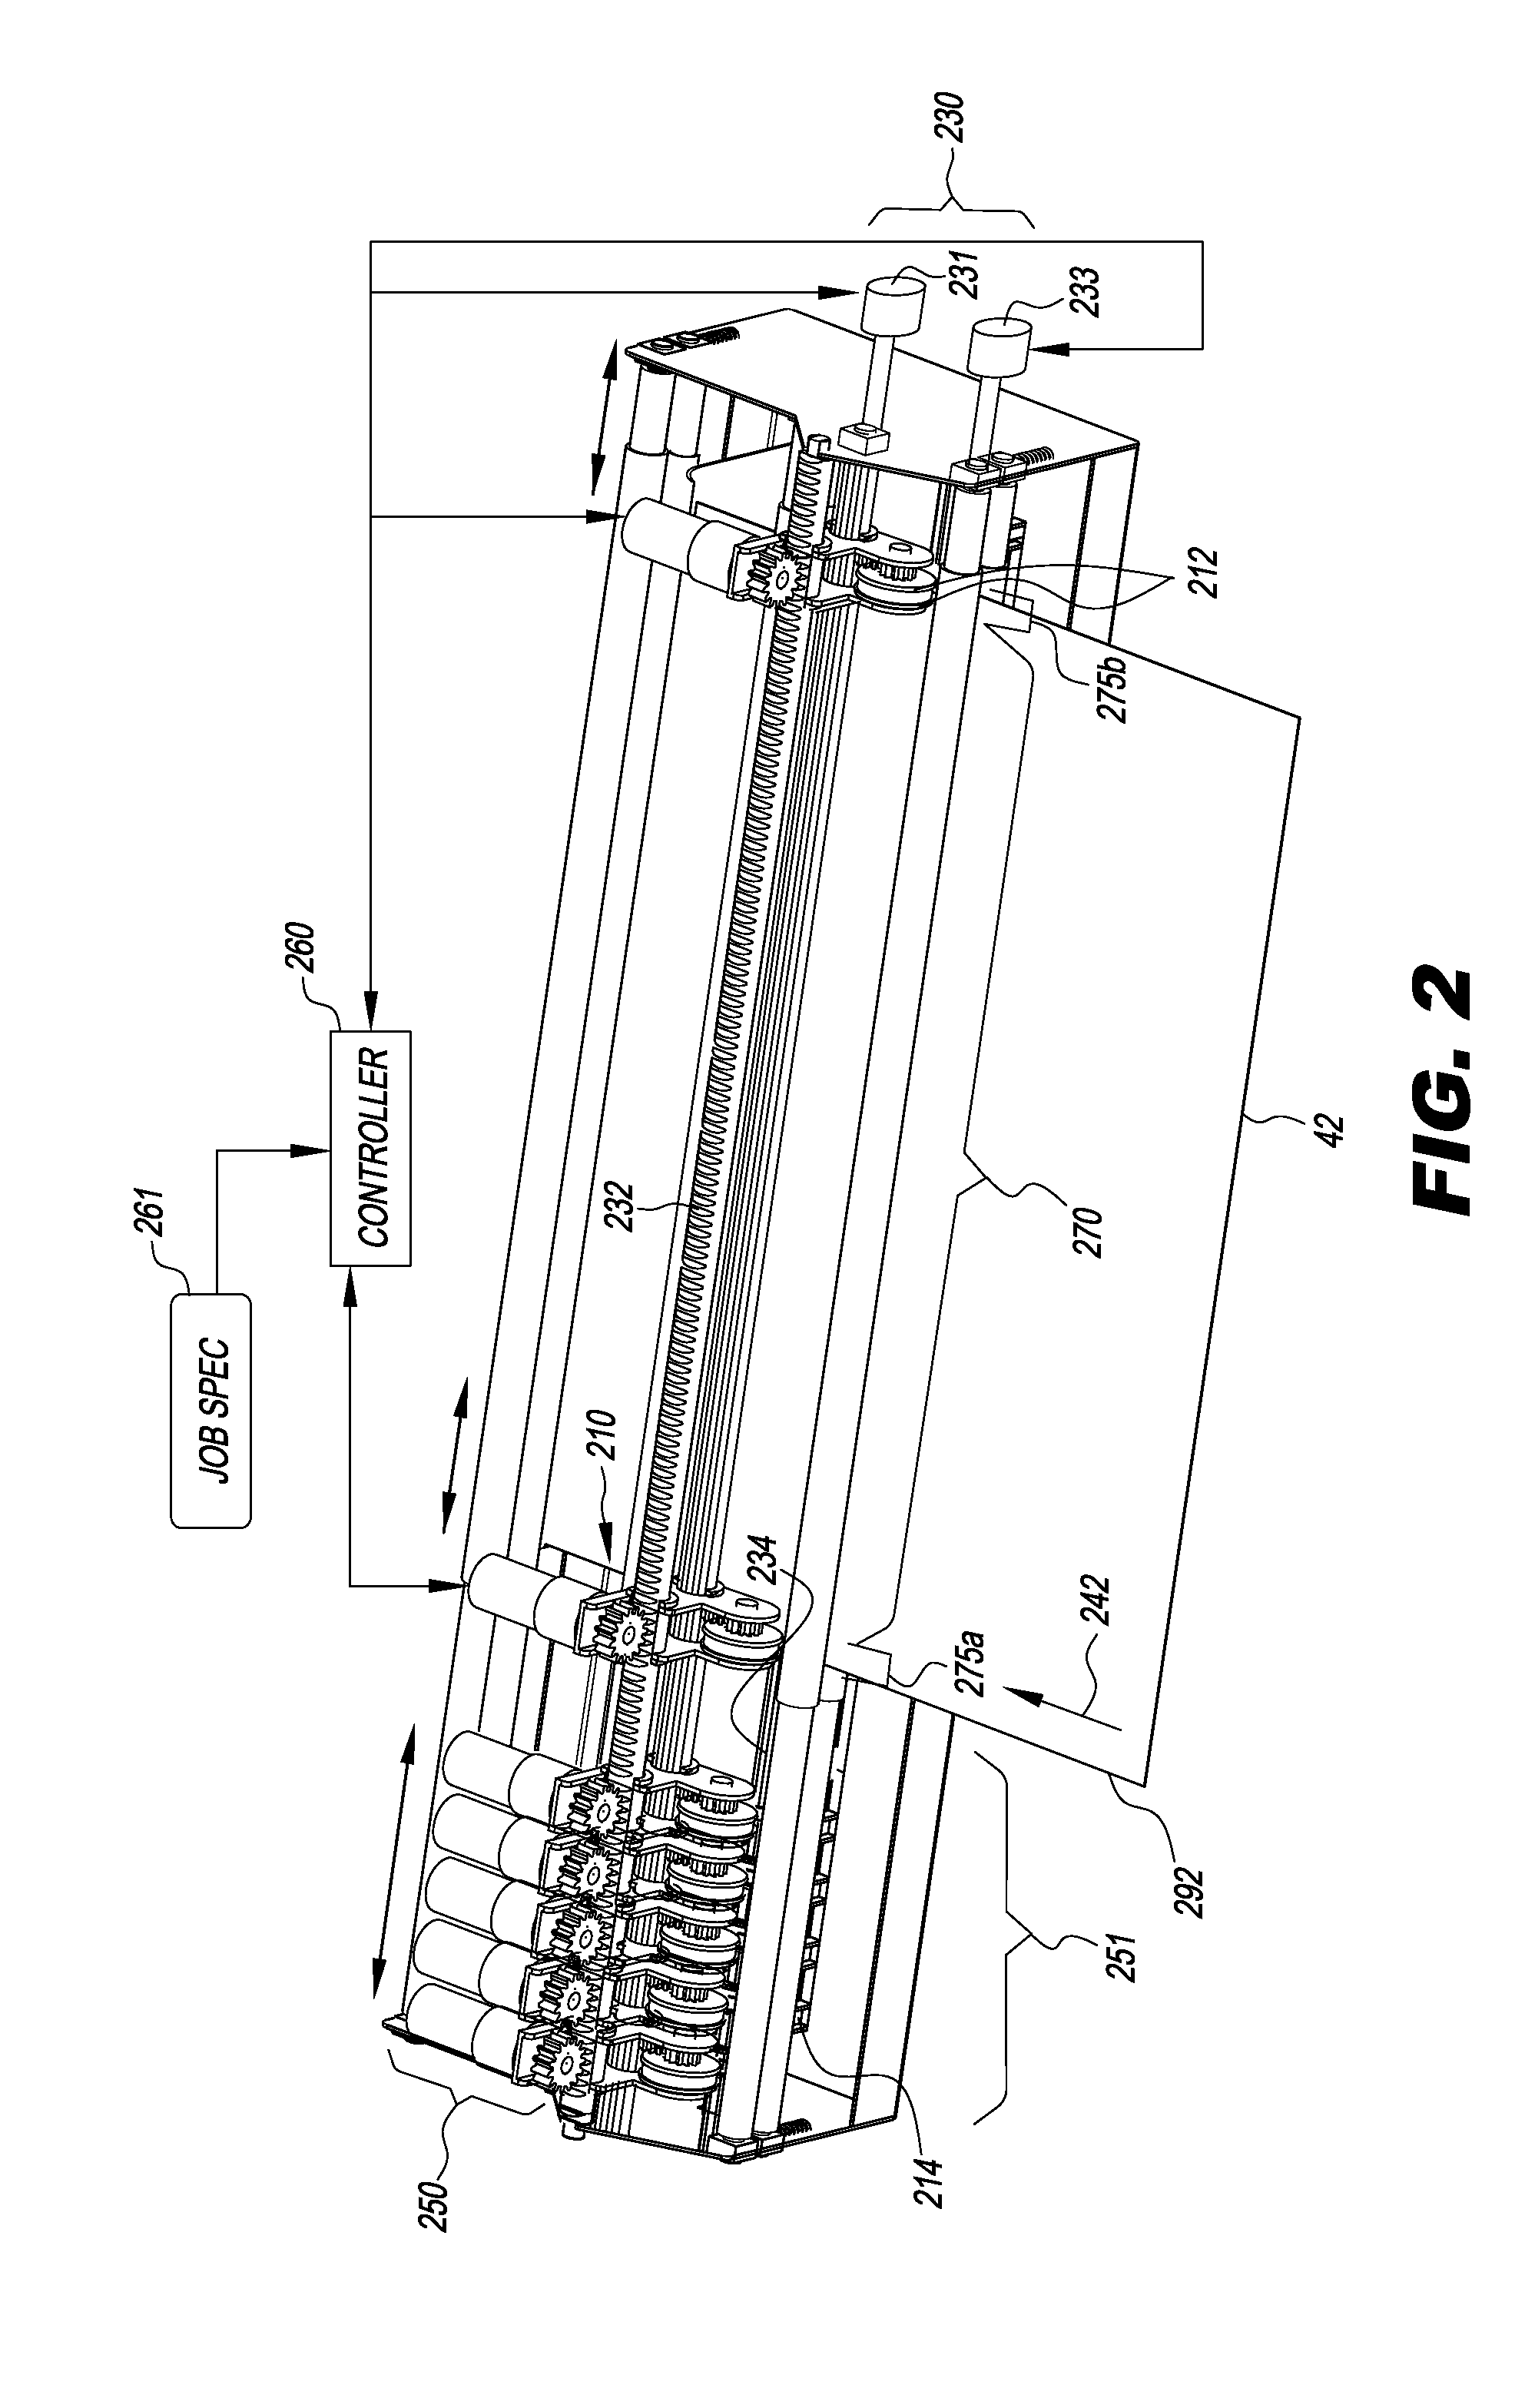 Perforator with backer and translating perforating devices